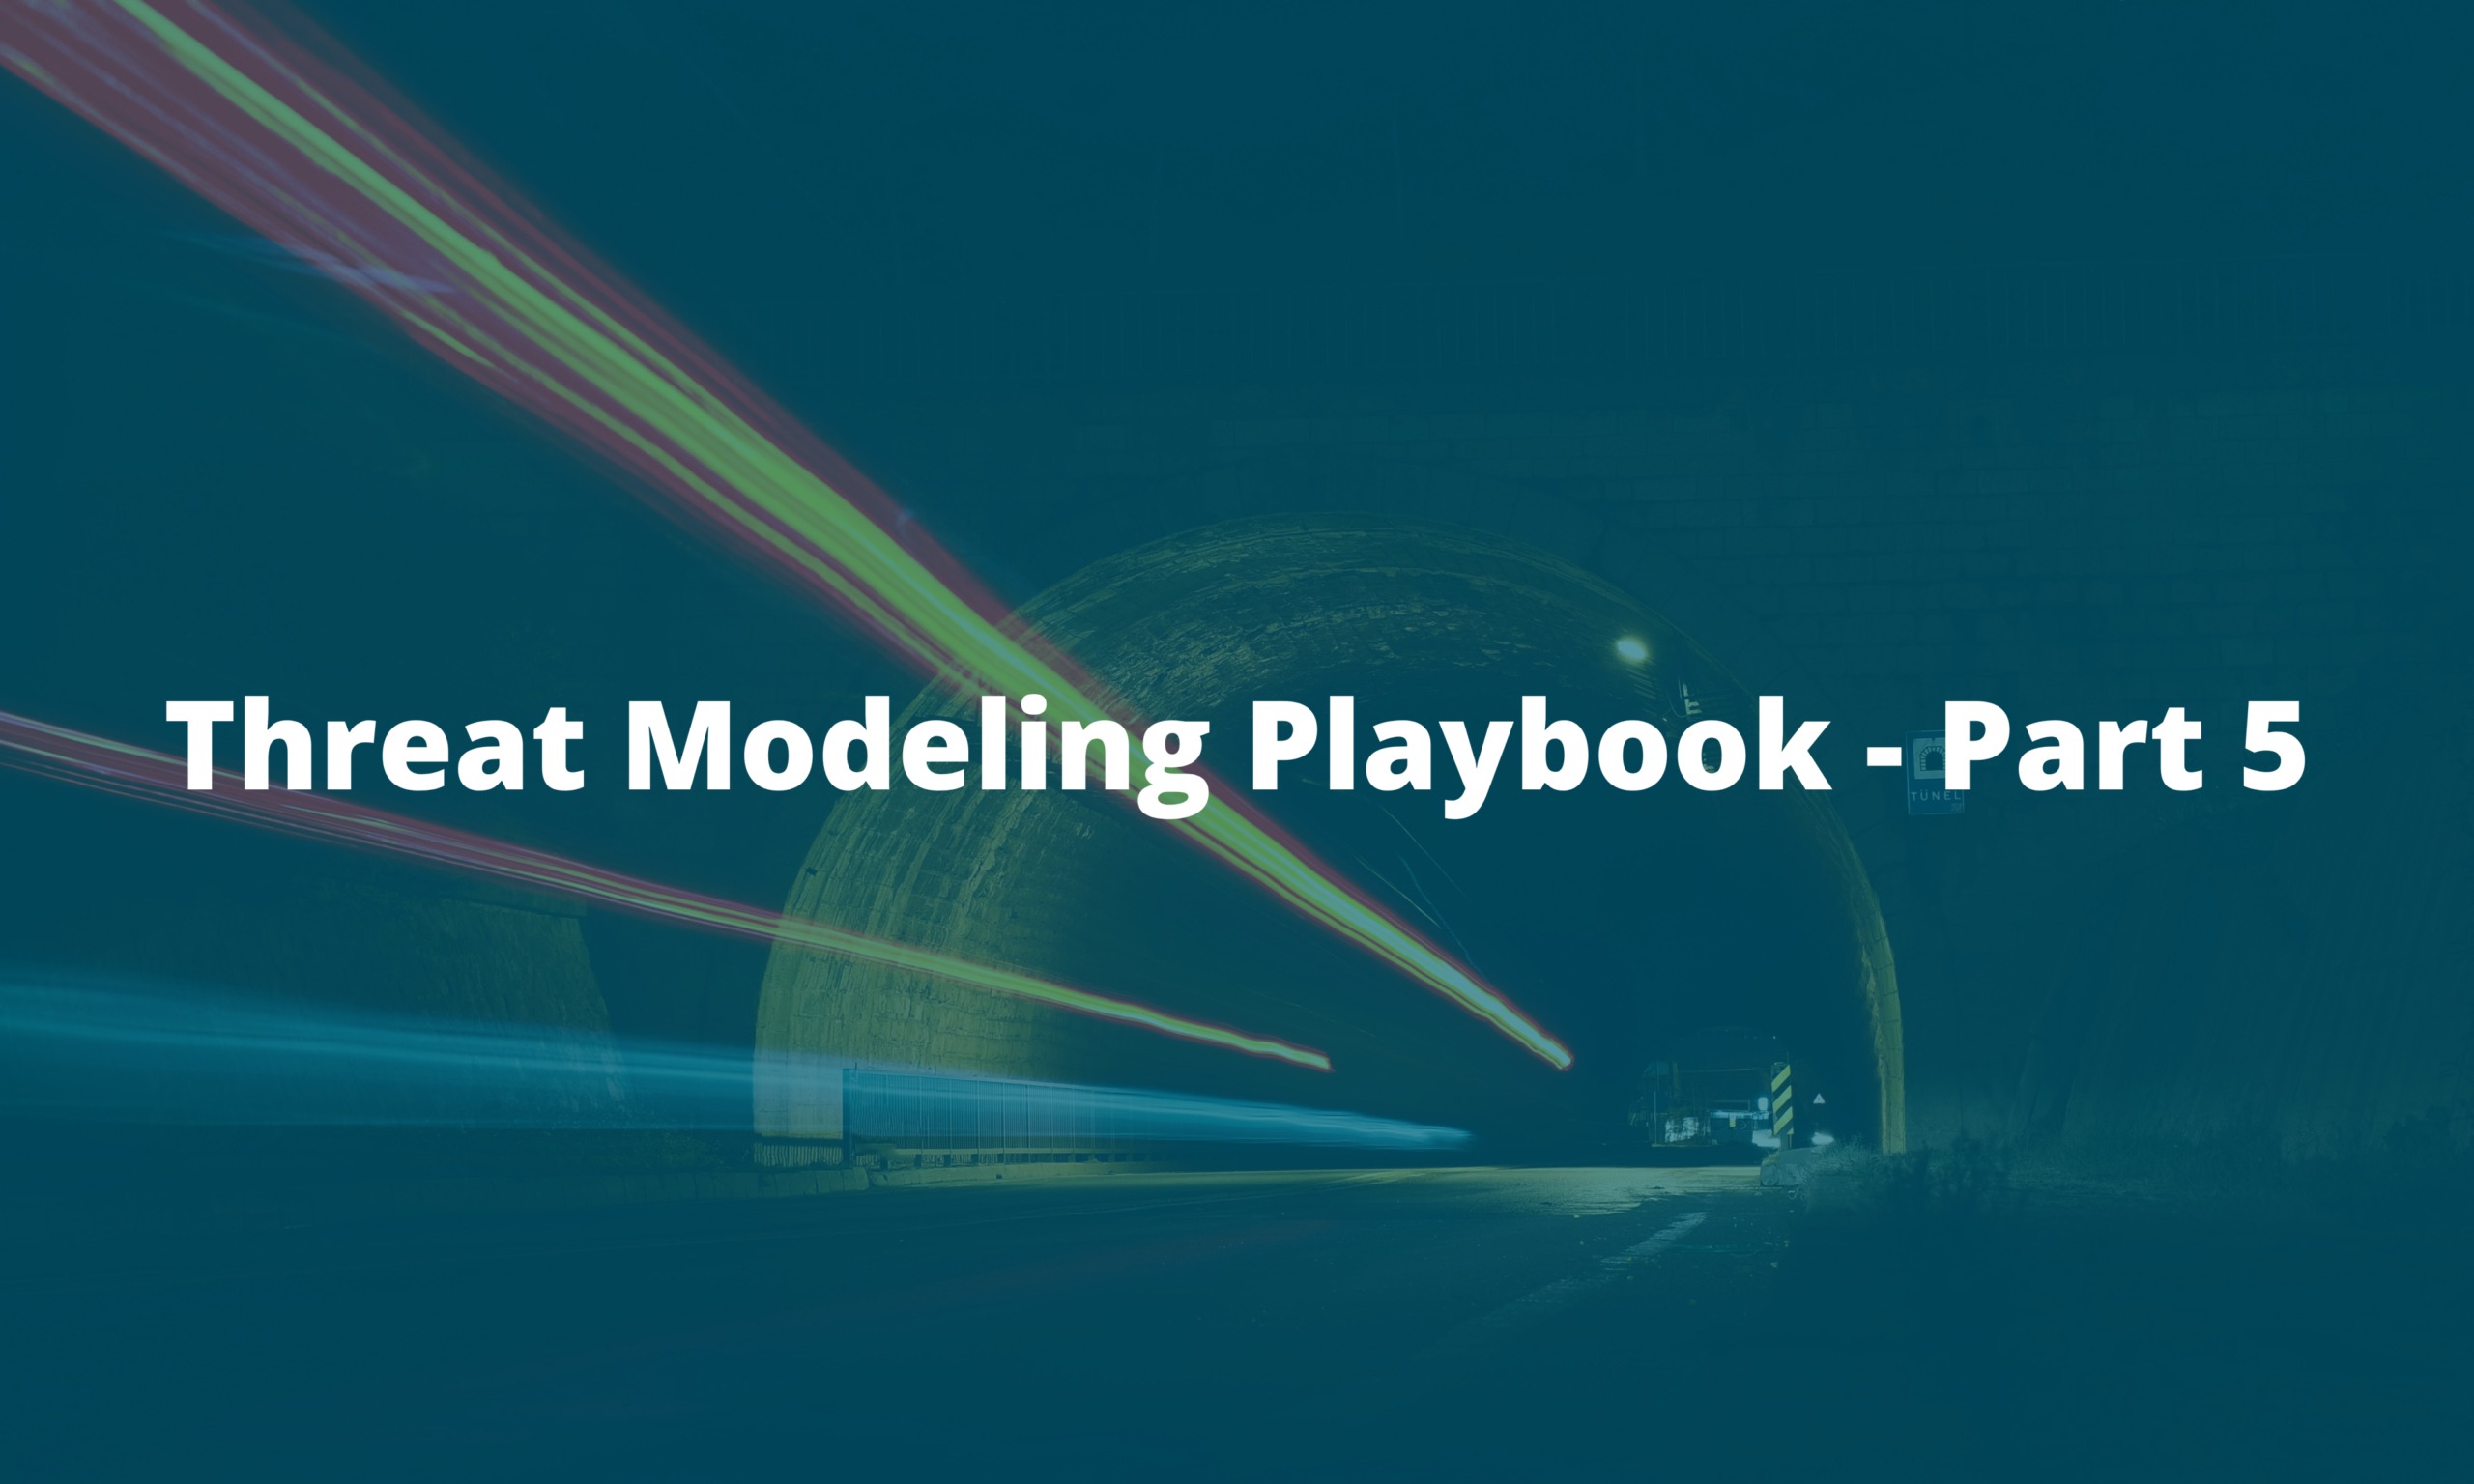 Threat Modeling Playbook part 5